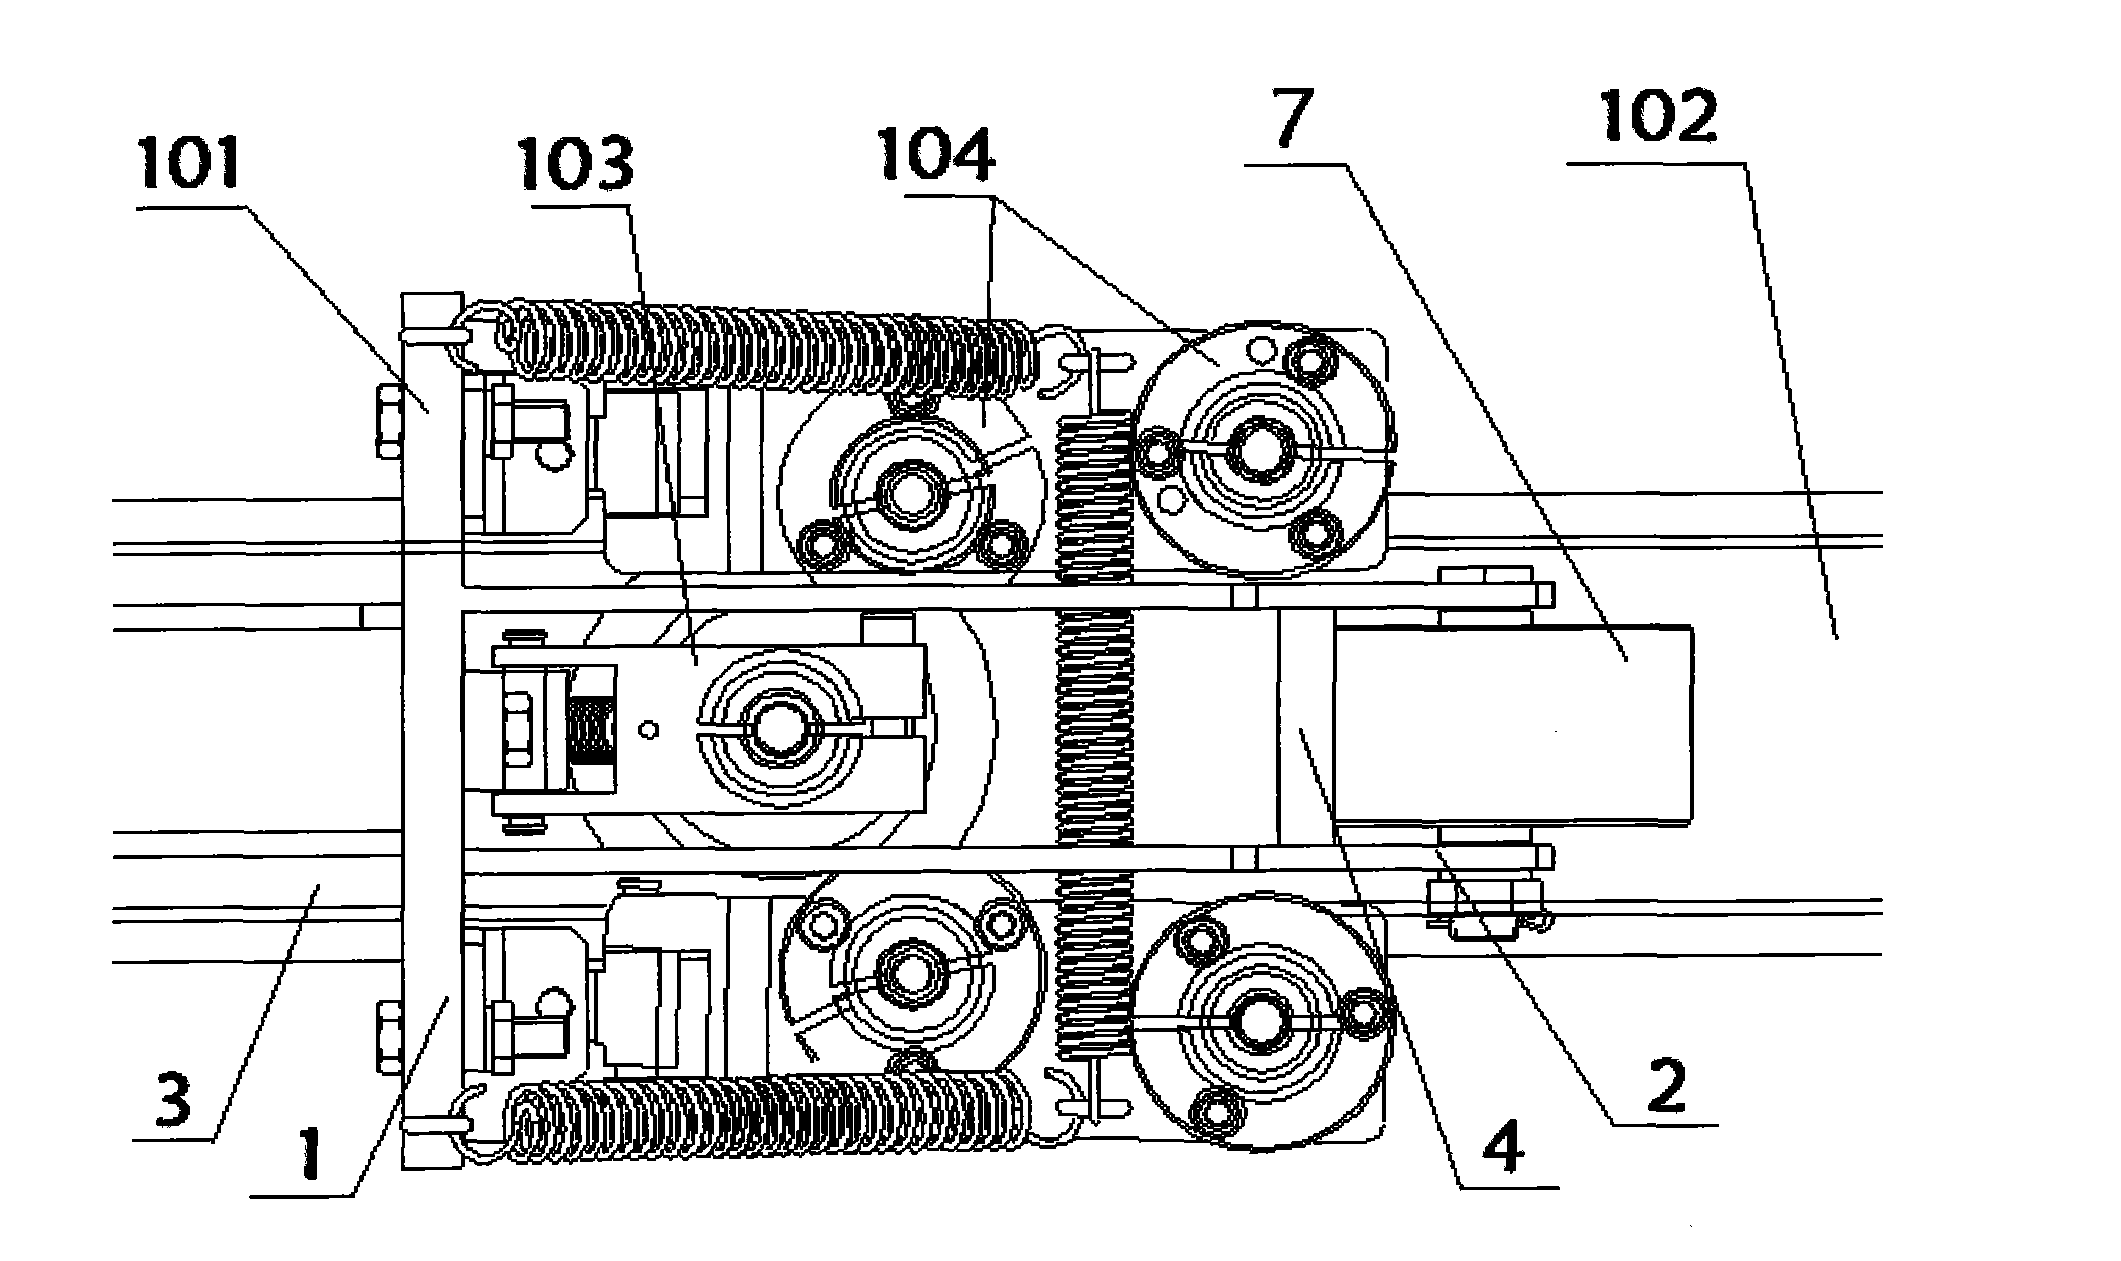 Cleaning brush device for track cleaning and maintaining vehicle